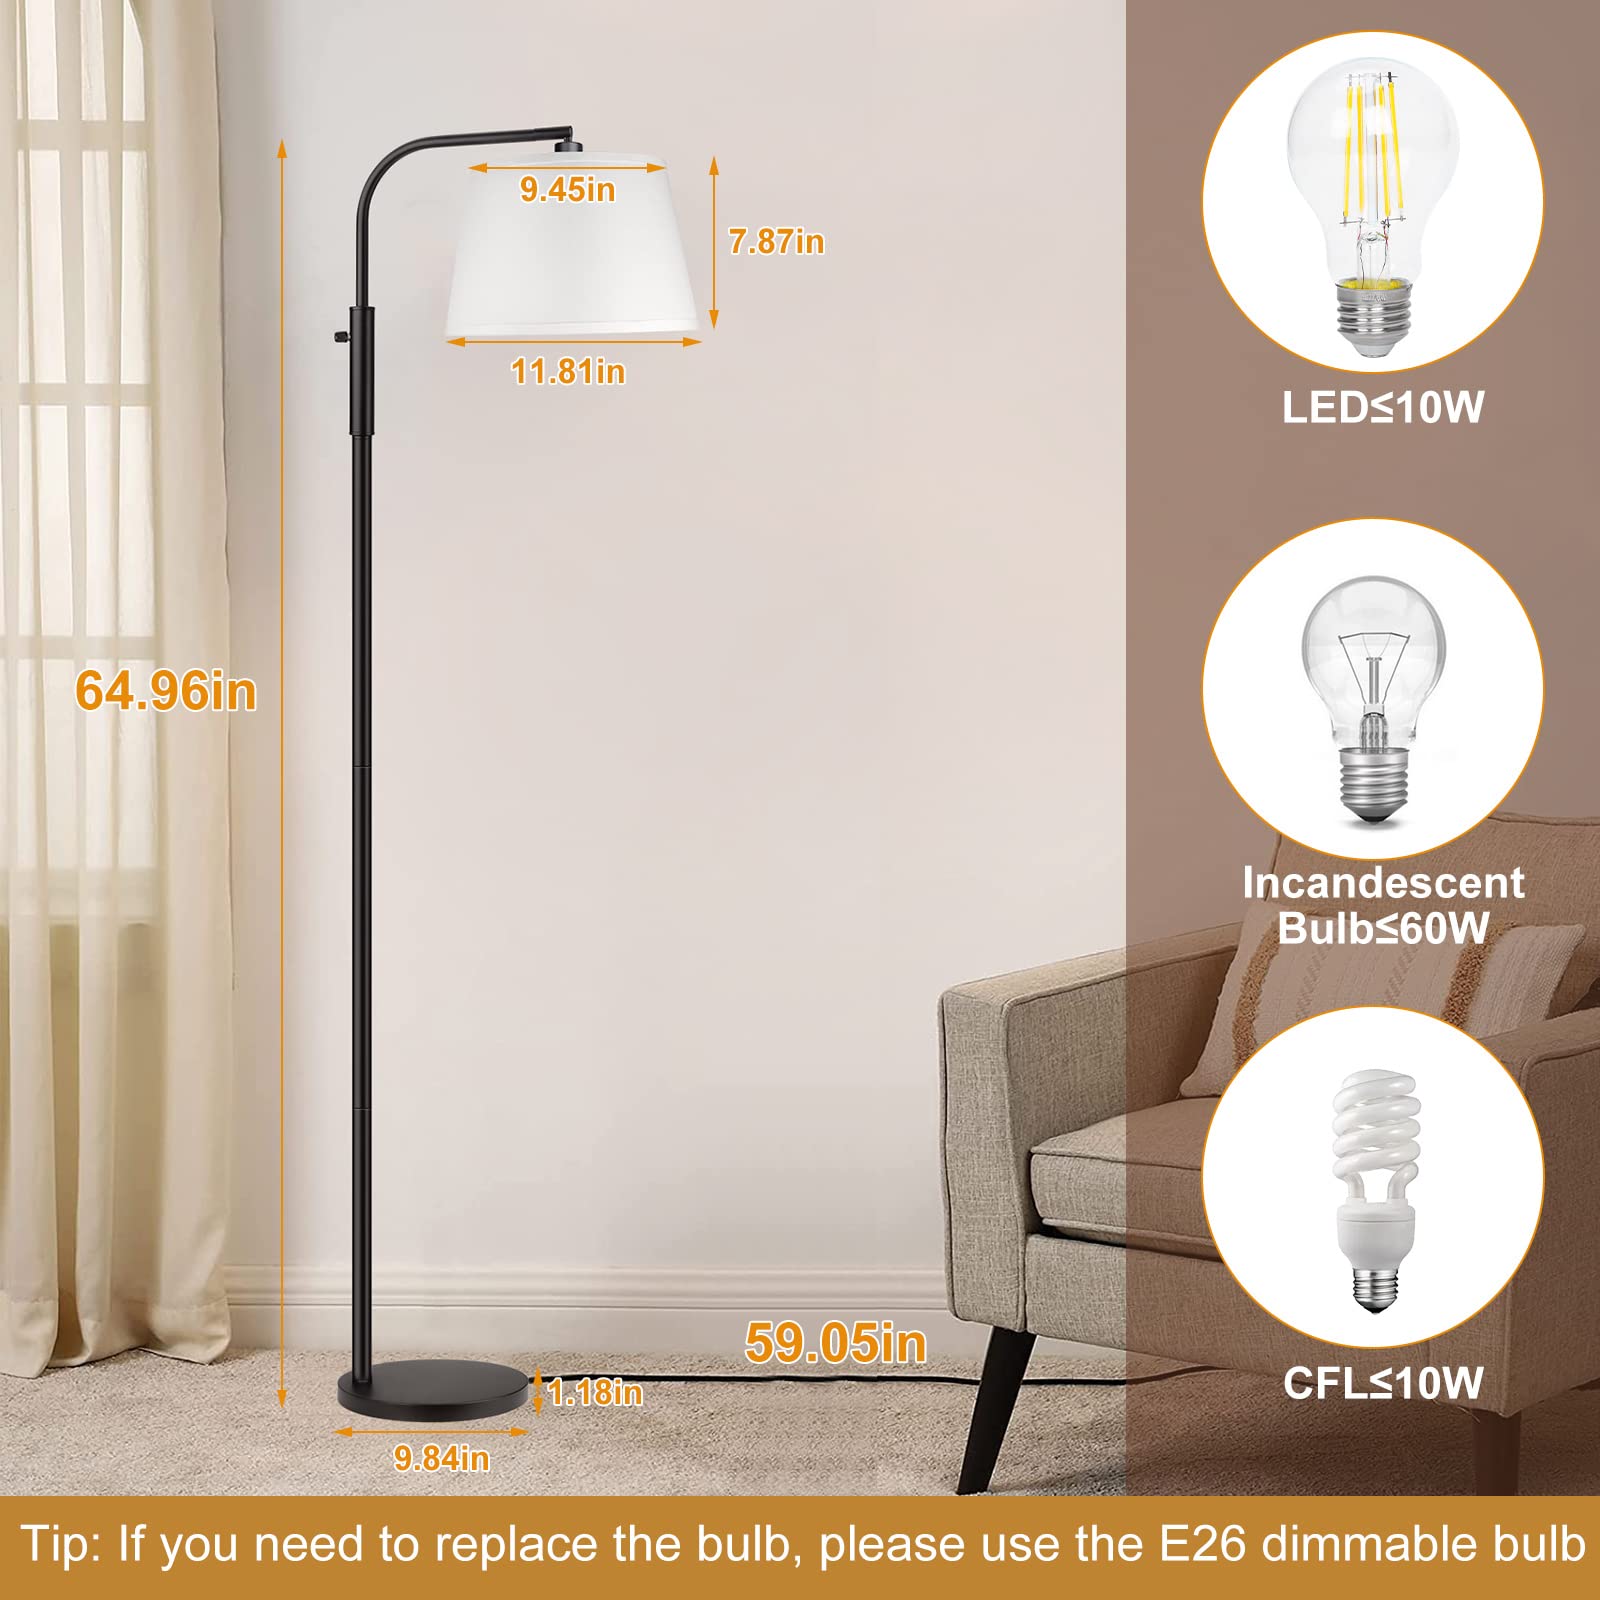 Jeagop Dimmable Floor Lamp, Arc Floor Lamps for Living Room with Adjustable Hanging Shade, Modern Standing Tall Lamp for Living Room Bedroom Office, 1000 Lumens LED Bulb Included